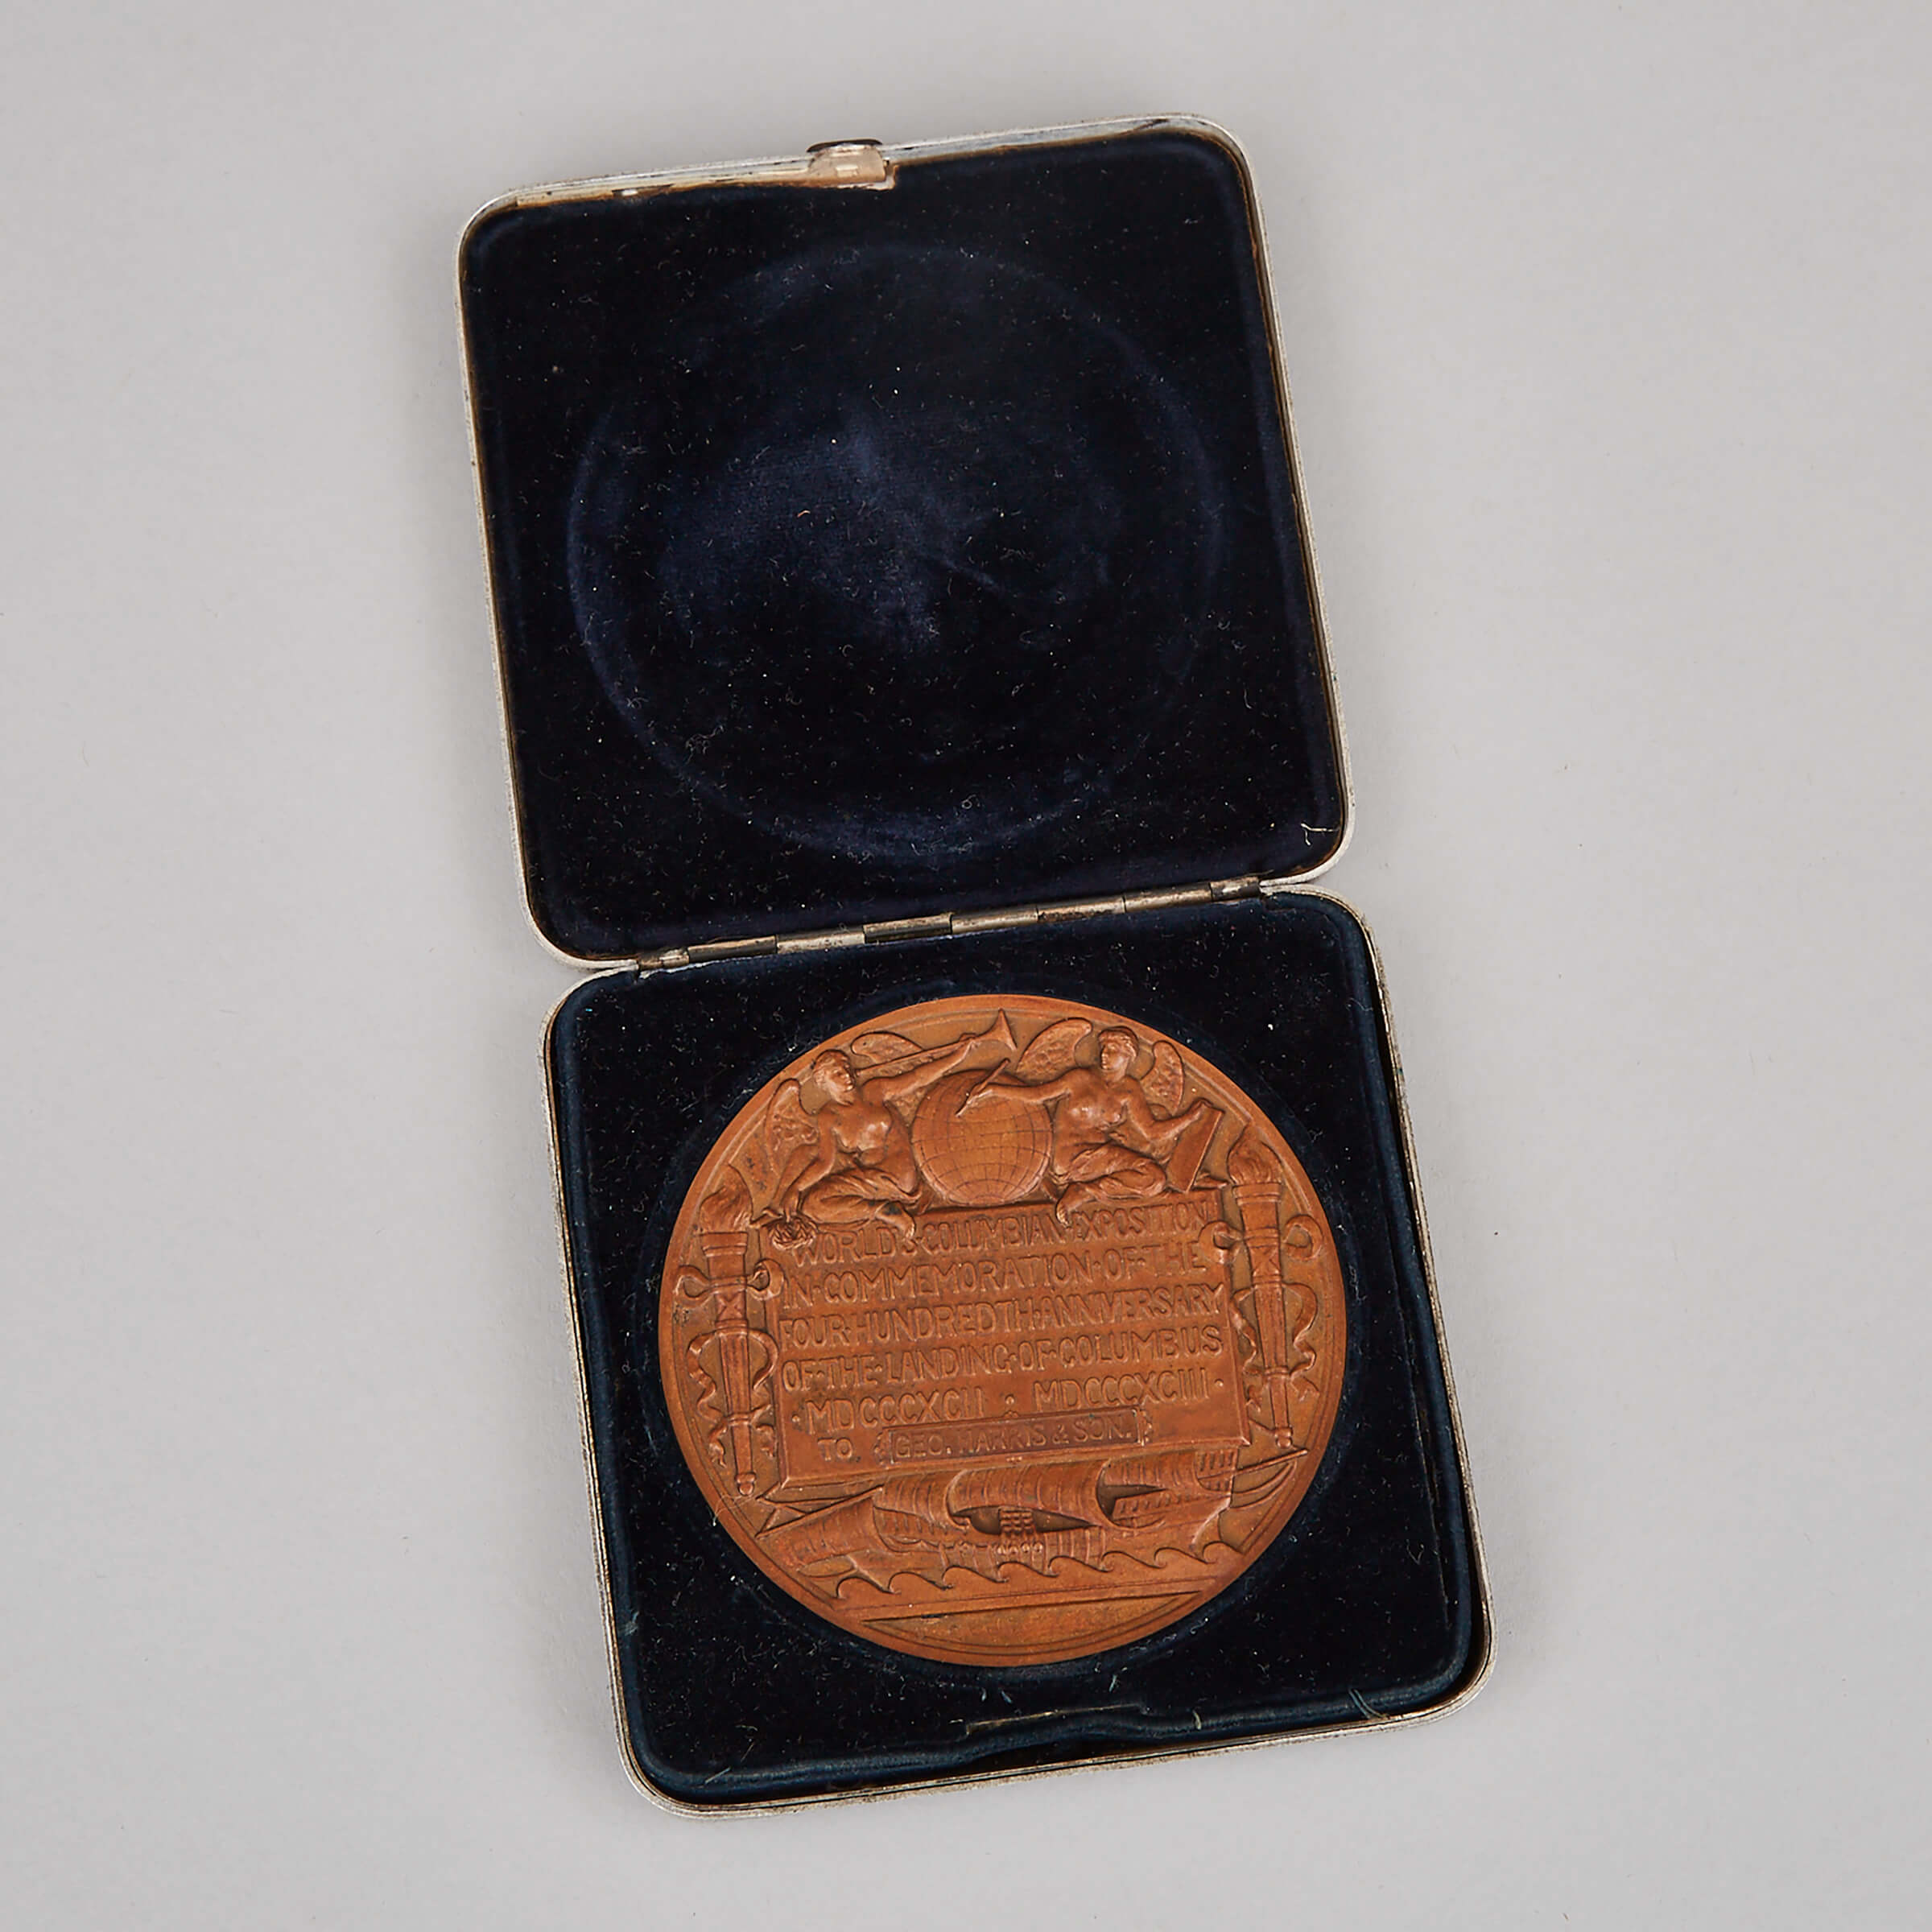 Chicago Exposition Cased Bronze Medal, 1892-3